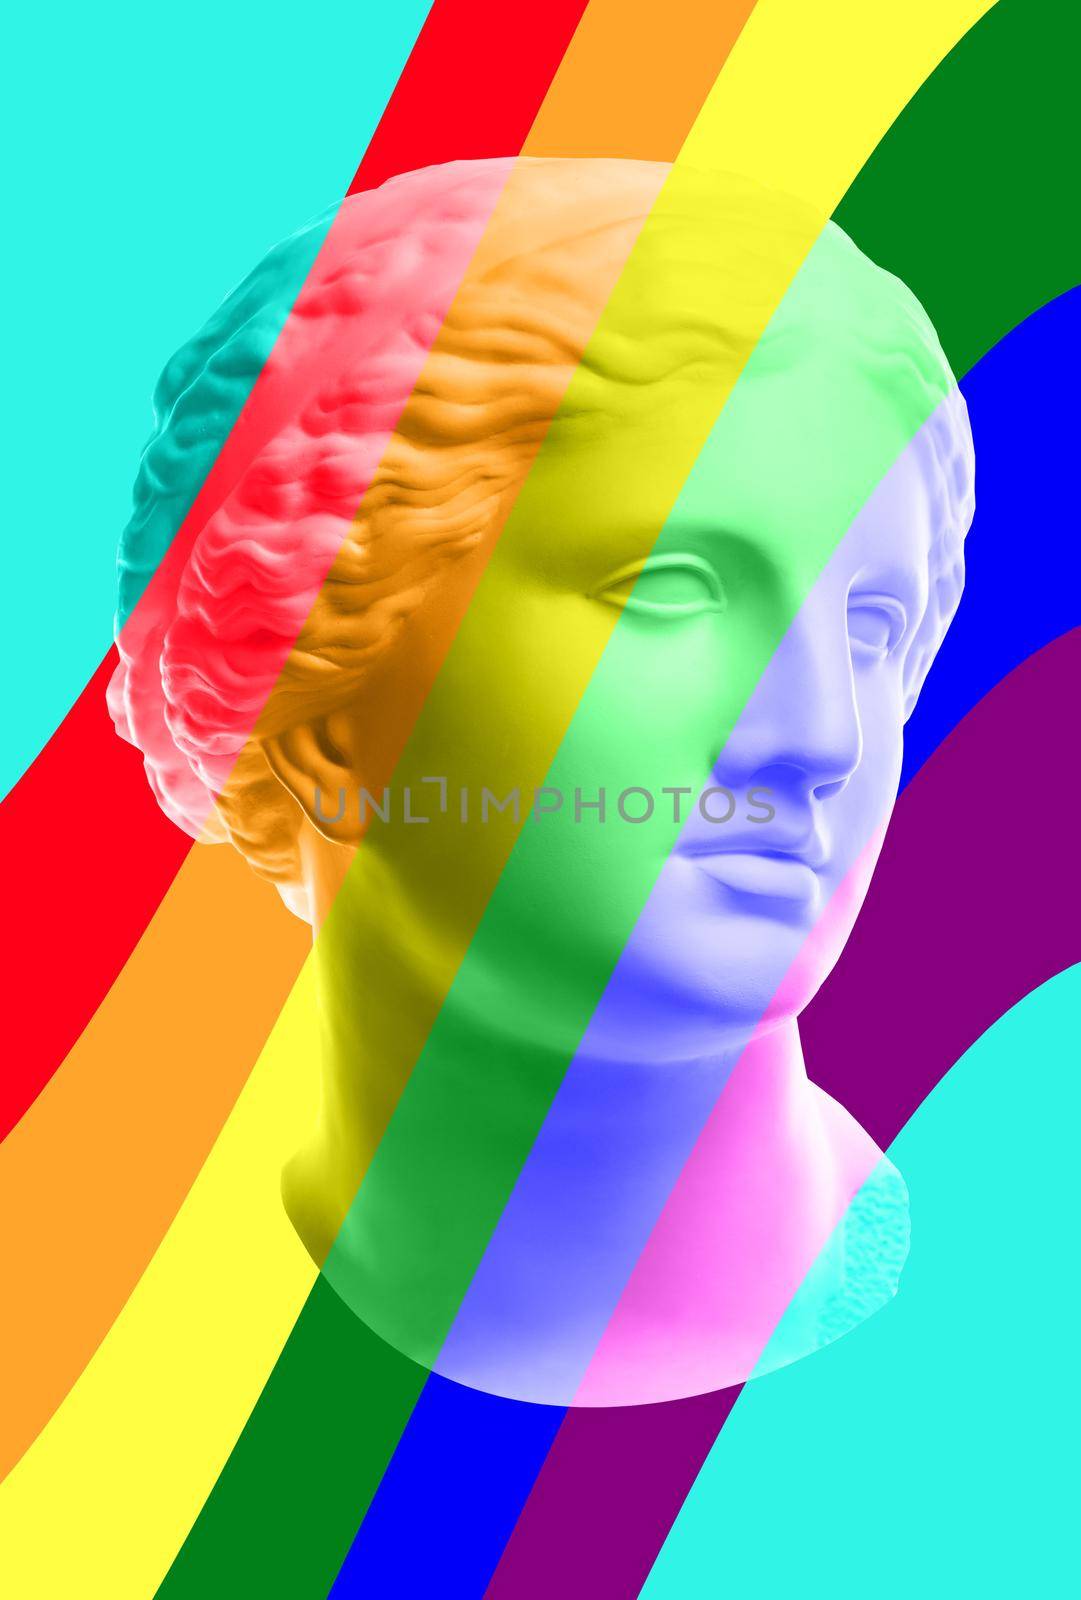 Collage with plaster antique sculpture of human face in a pop art style. Creative concept colorful neon image with ancient statue head. Zine culture. Cyberpunk, webpunk and surreal style poster. by bashta